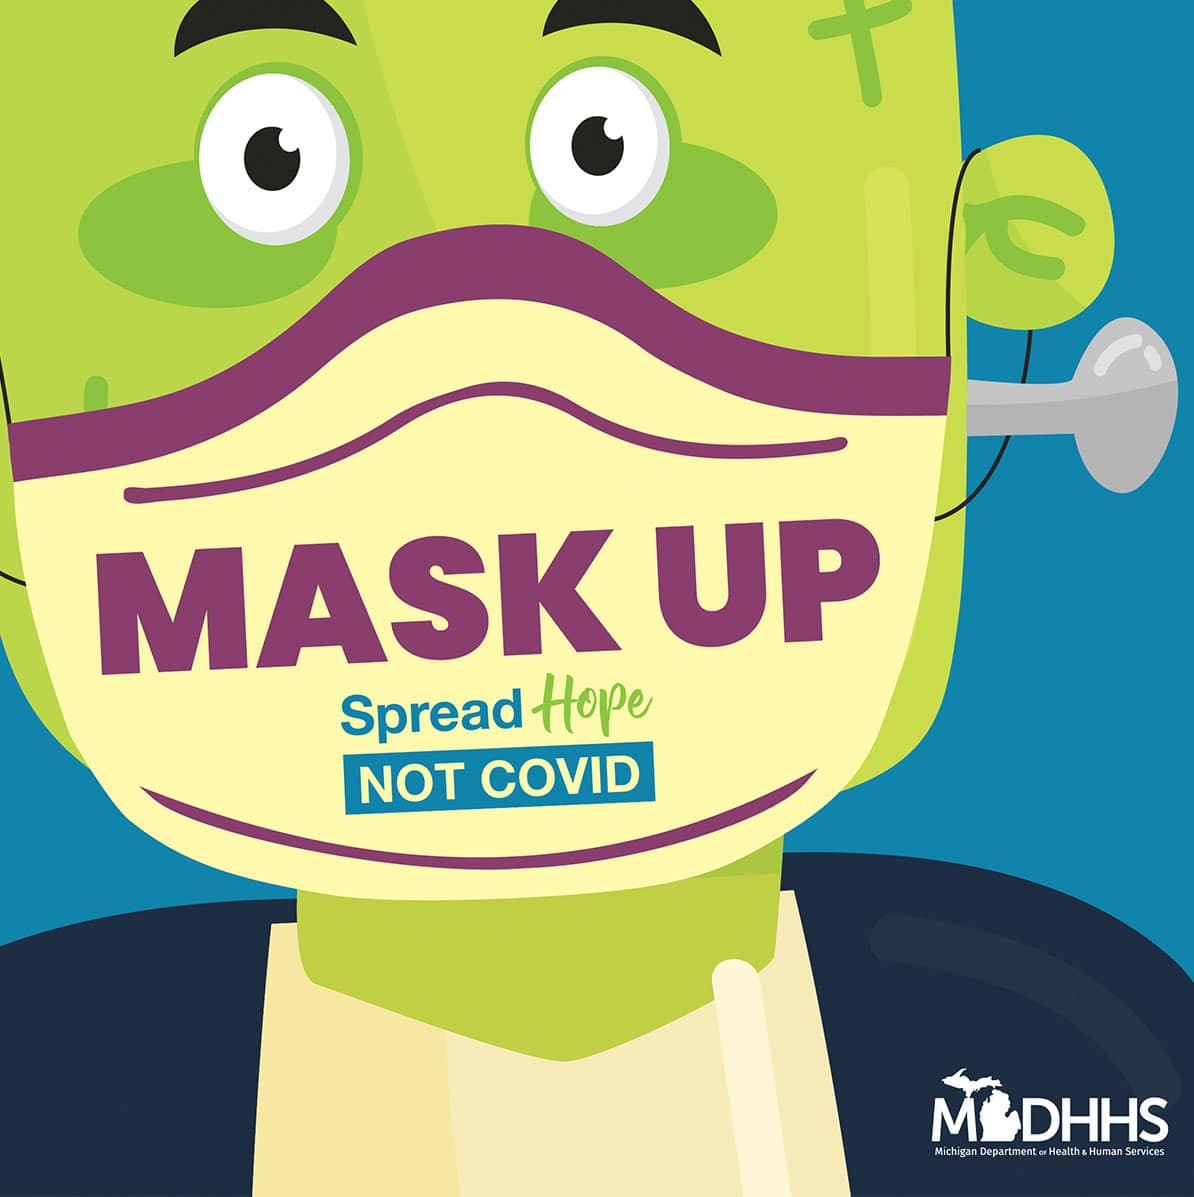 Mask Up, Spread Hope Not COVID